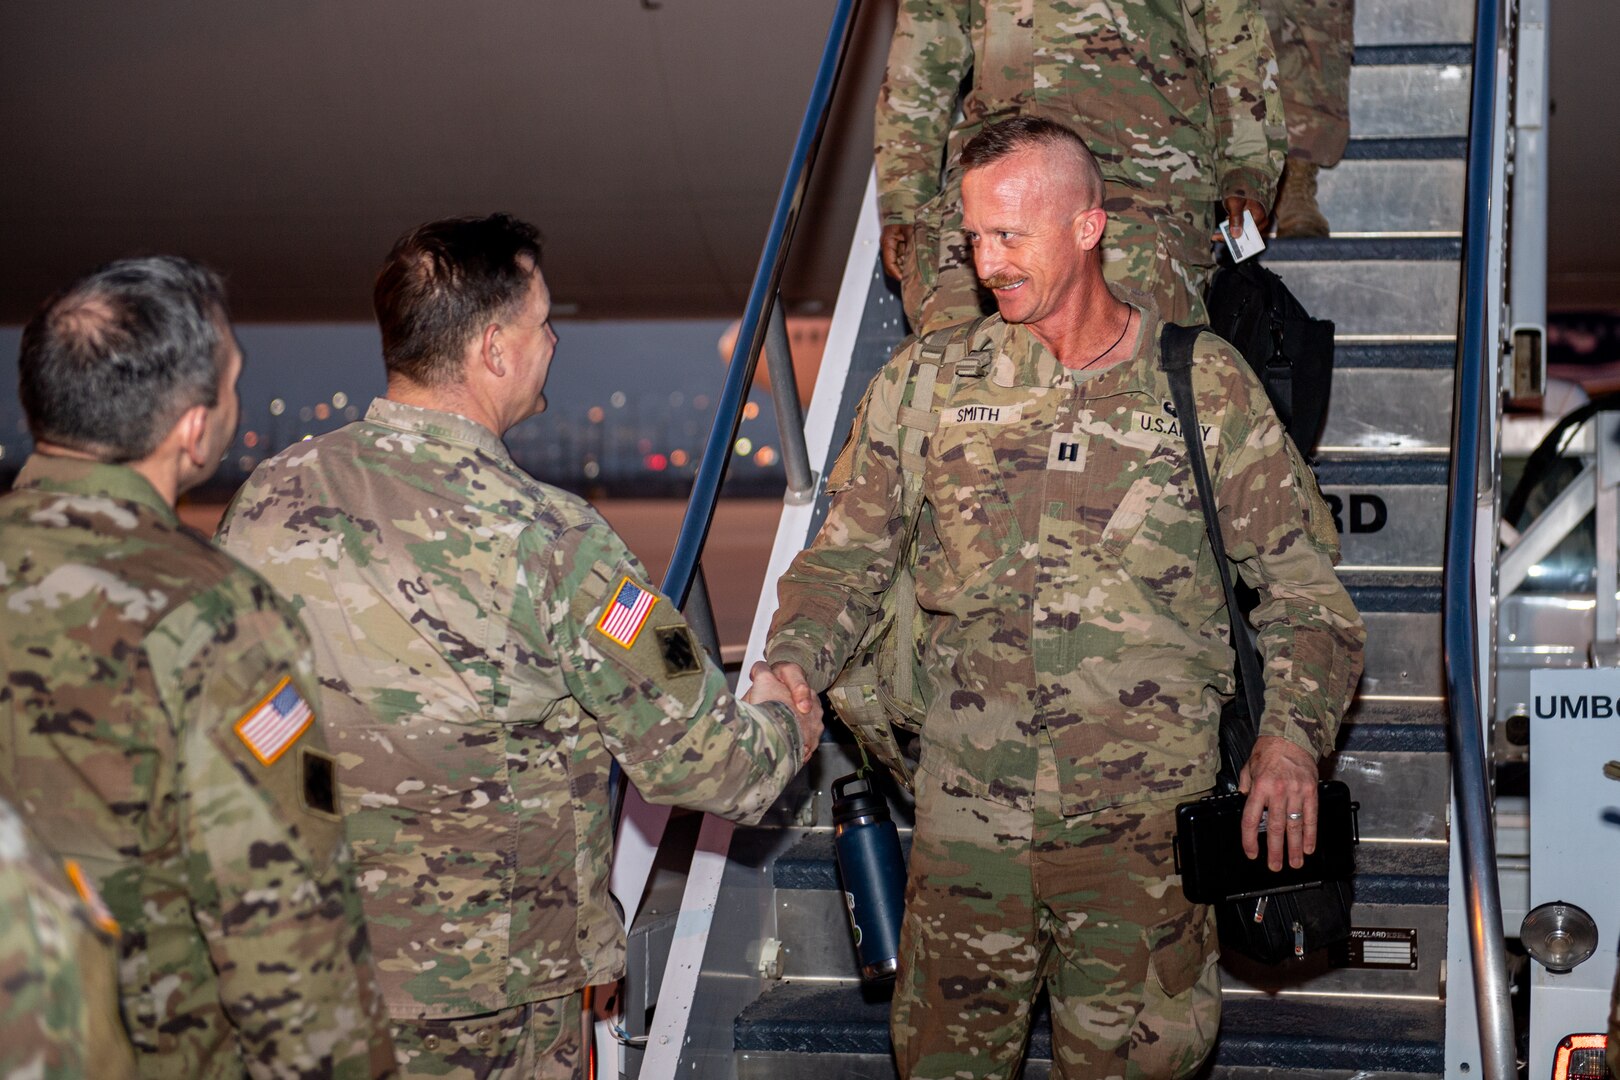 Capt. Jeremiah Smith, a member of Task Force Tomahawk, shakes hands with Col. Andrew Ballenger, commander, 45th Infantry Brigade Combat Team, as Smith arrives at Fort Bliss, Texas, Feb. 18, 2024, following a nine-month deployment to the Horn of Africa. Task Force Tomahawk is made up of units of the 45th Infantry Brigade Combat Team - primarily of the 1st Battalion, 179th Infantry Regiment as well as companies from the 1st Battalion, 279th Infantry Regiment and 2nd Battalion, 134th Infantry Regiment (Airborne). TF Tomahawk was responsible for security at multiple locations across several countries in the Horn of Africa as well as manning the East African Response Force. (Oklahoma National Guard photo by Anthony Jones)